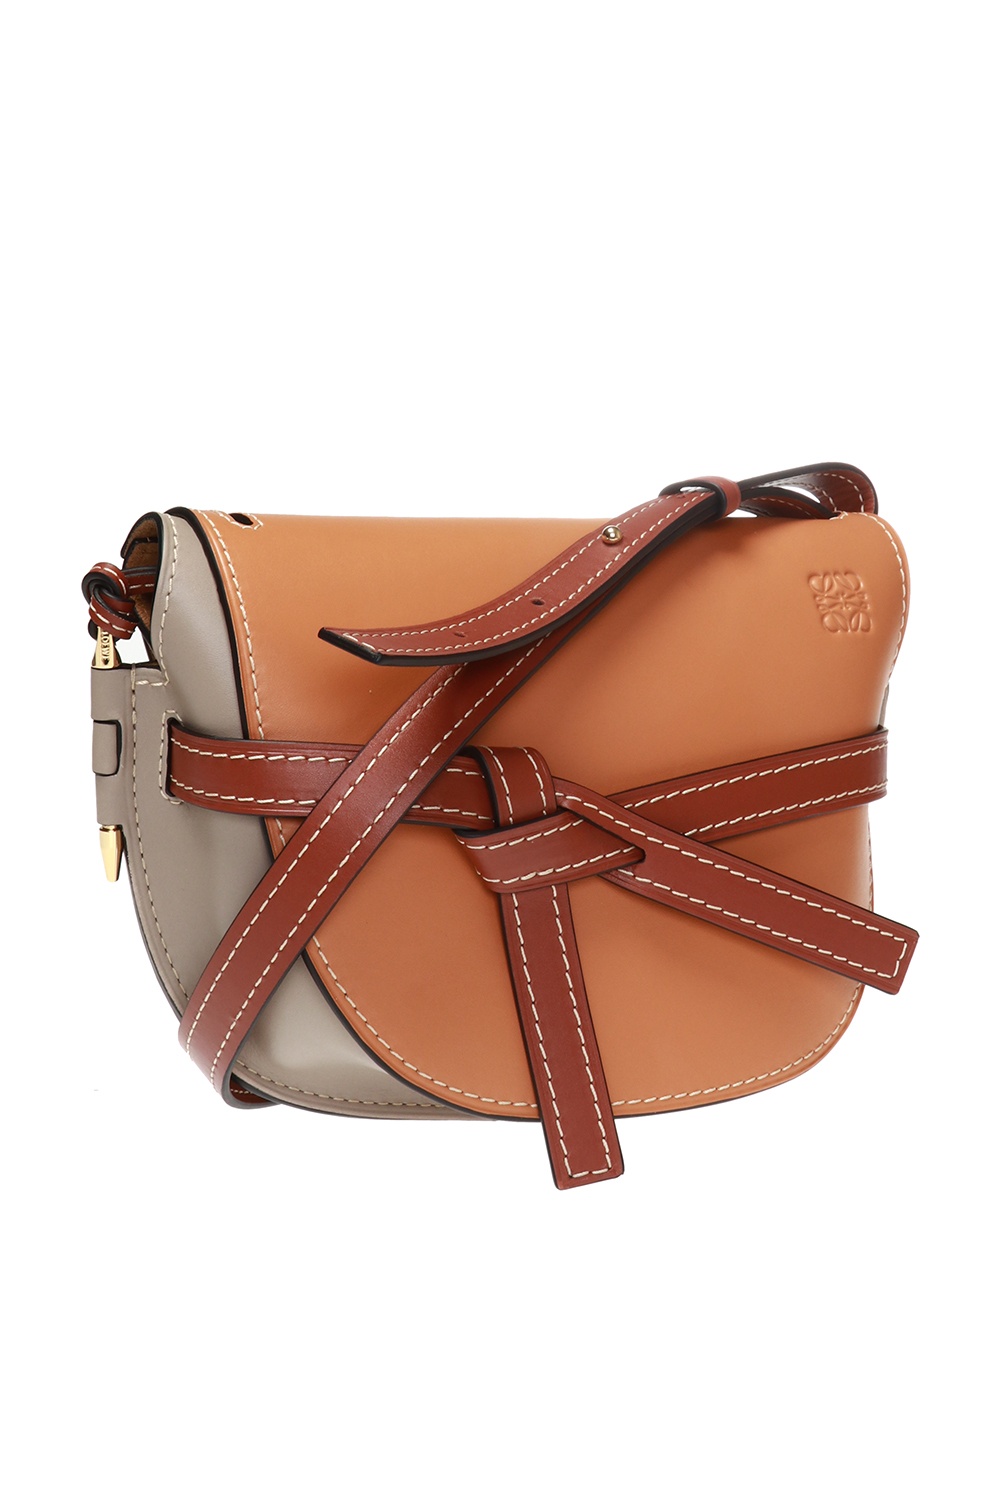 LOEWE Gate Small Leather Crossbody Bag for Women